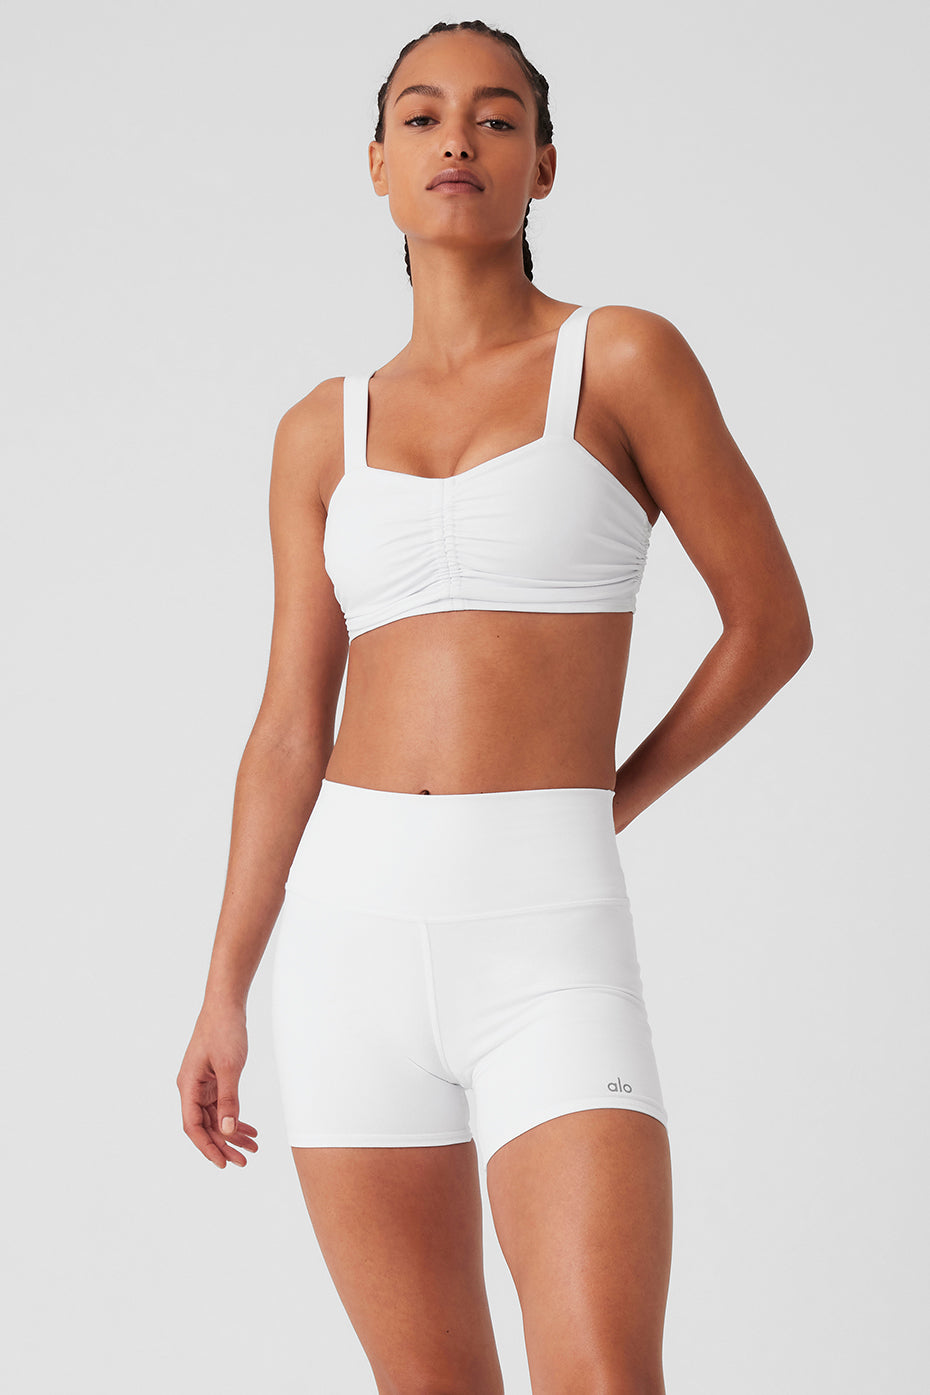 Victorious Sports Bra, White  High Support Perfect for Medium